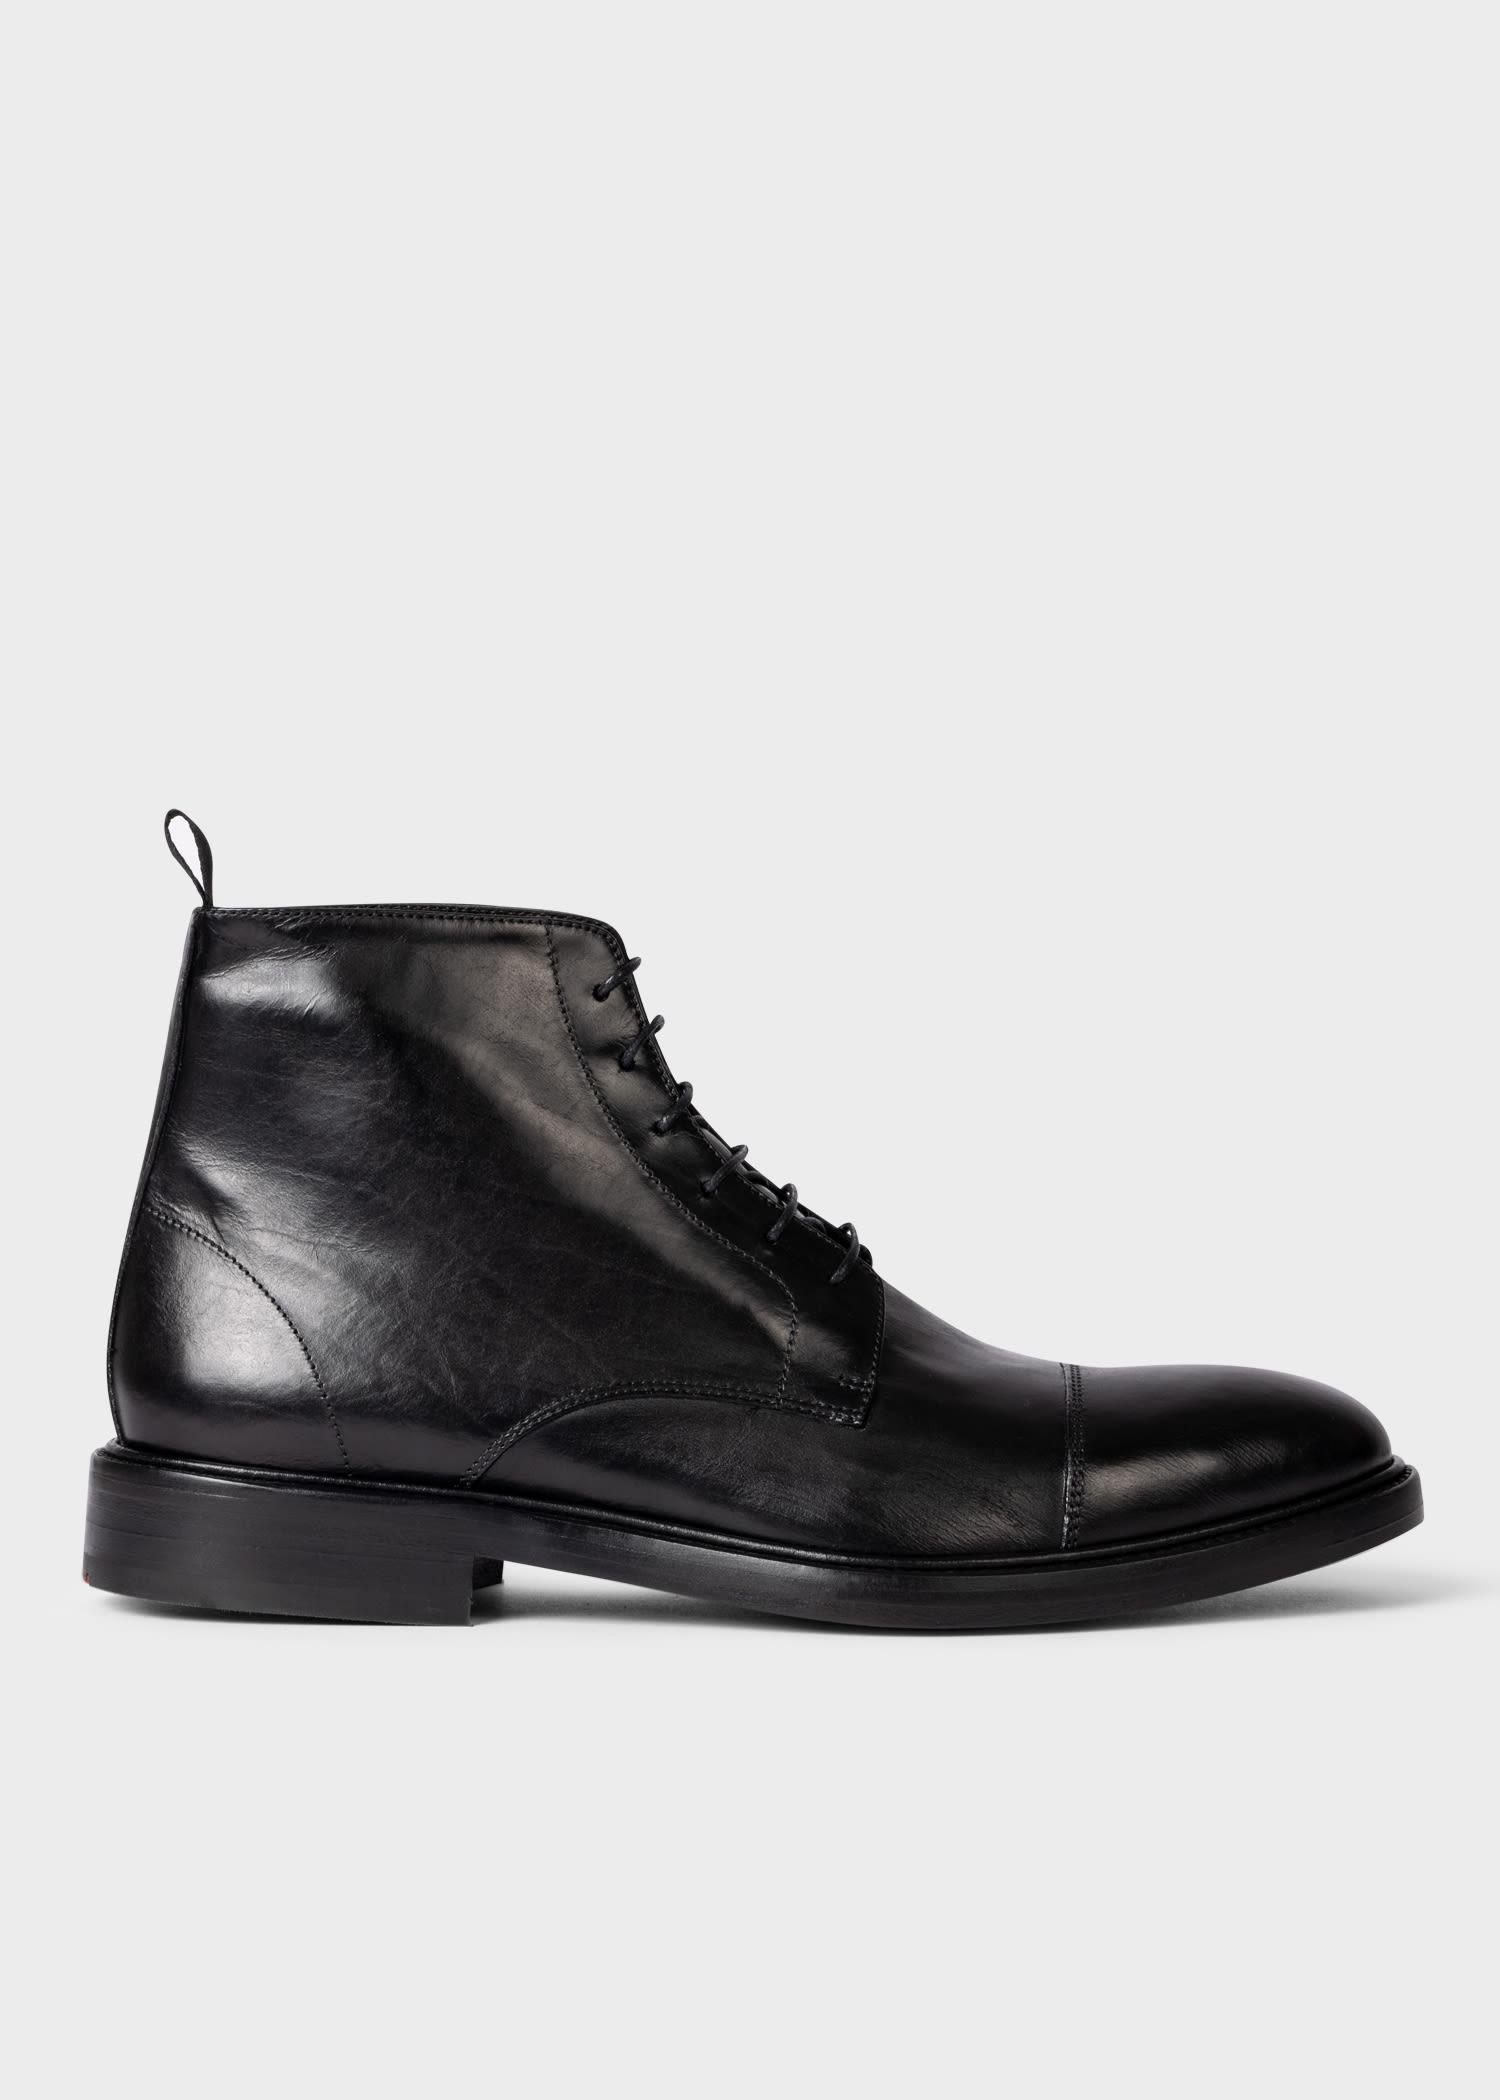 Paul Smith Black Leather 'jarman' Boots for Men | Lyst UK